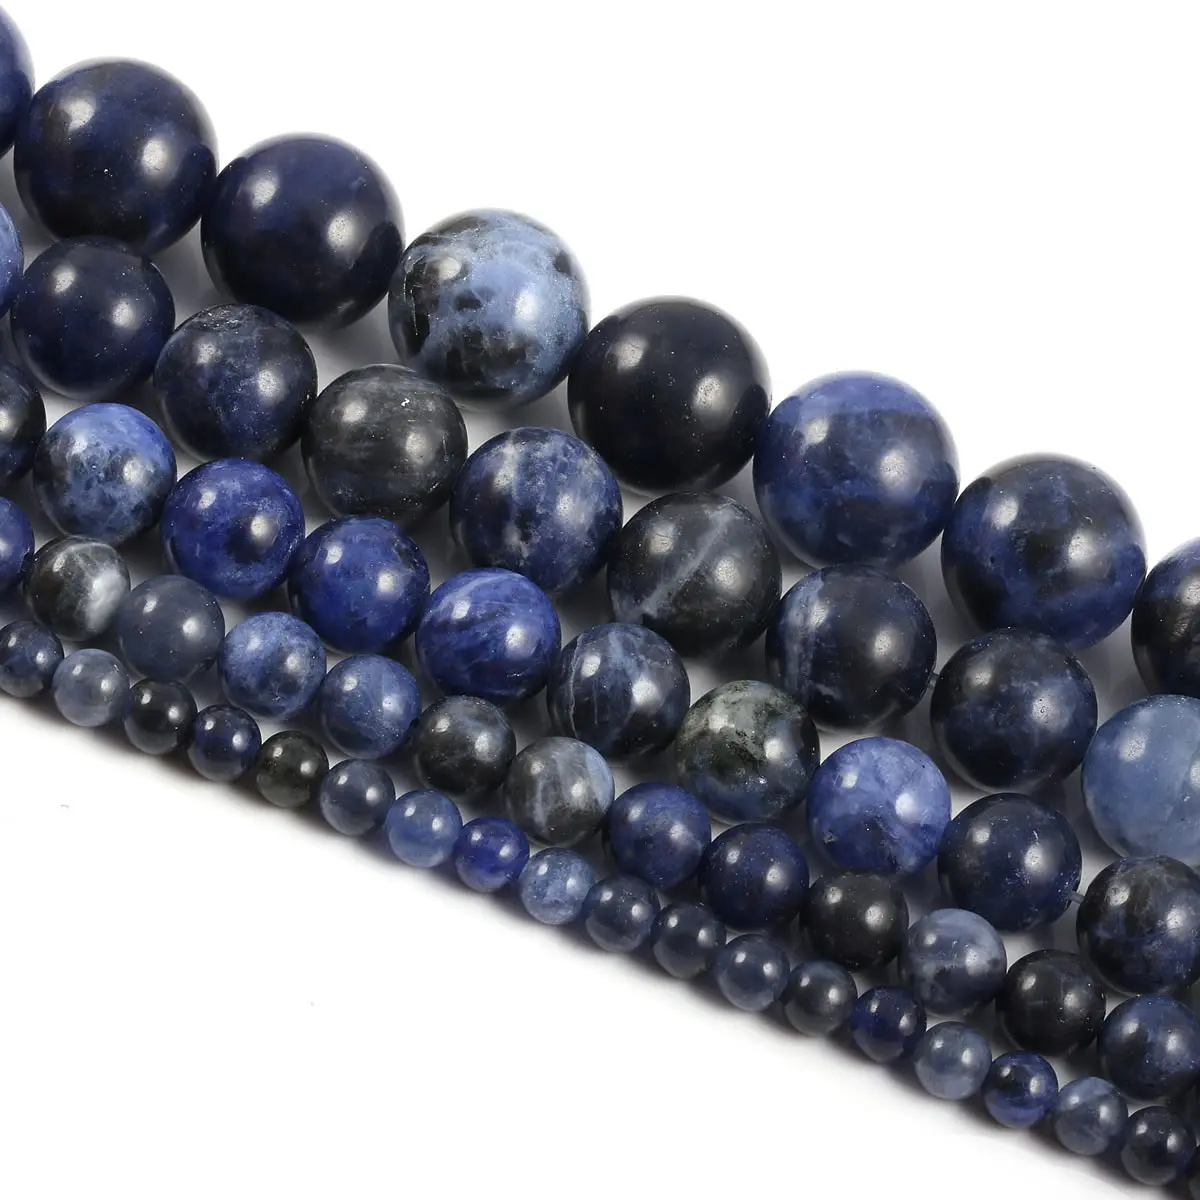 

Natural Stone Old Blue Sodalite Round Loose Beads 15" Strand 4 6 8 10 12mm for Jewelry Making DIY Necklace Bracelet Wholesale